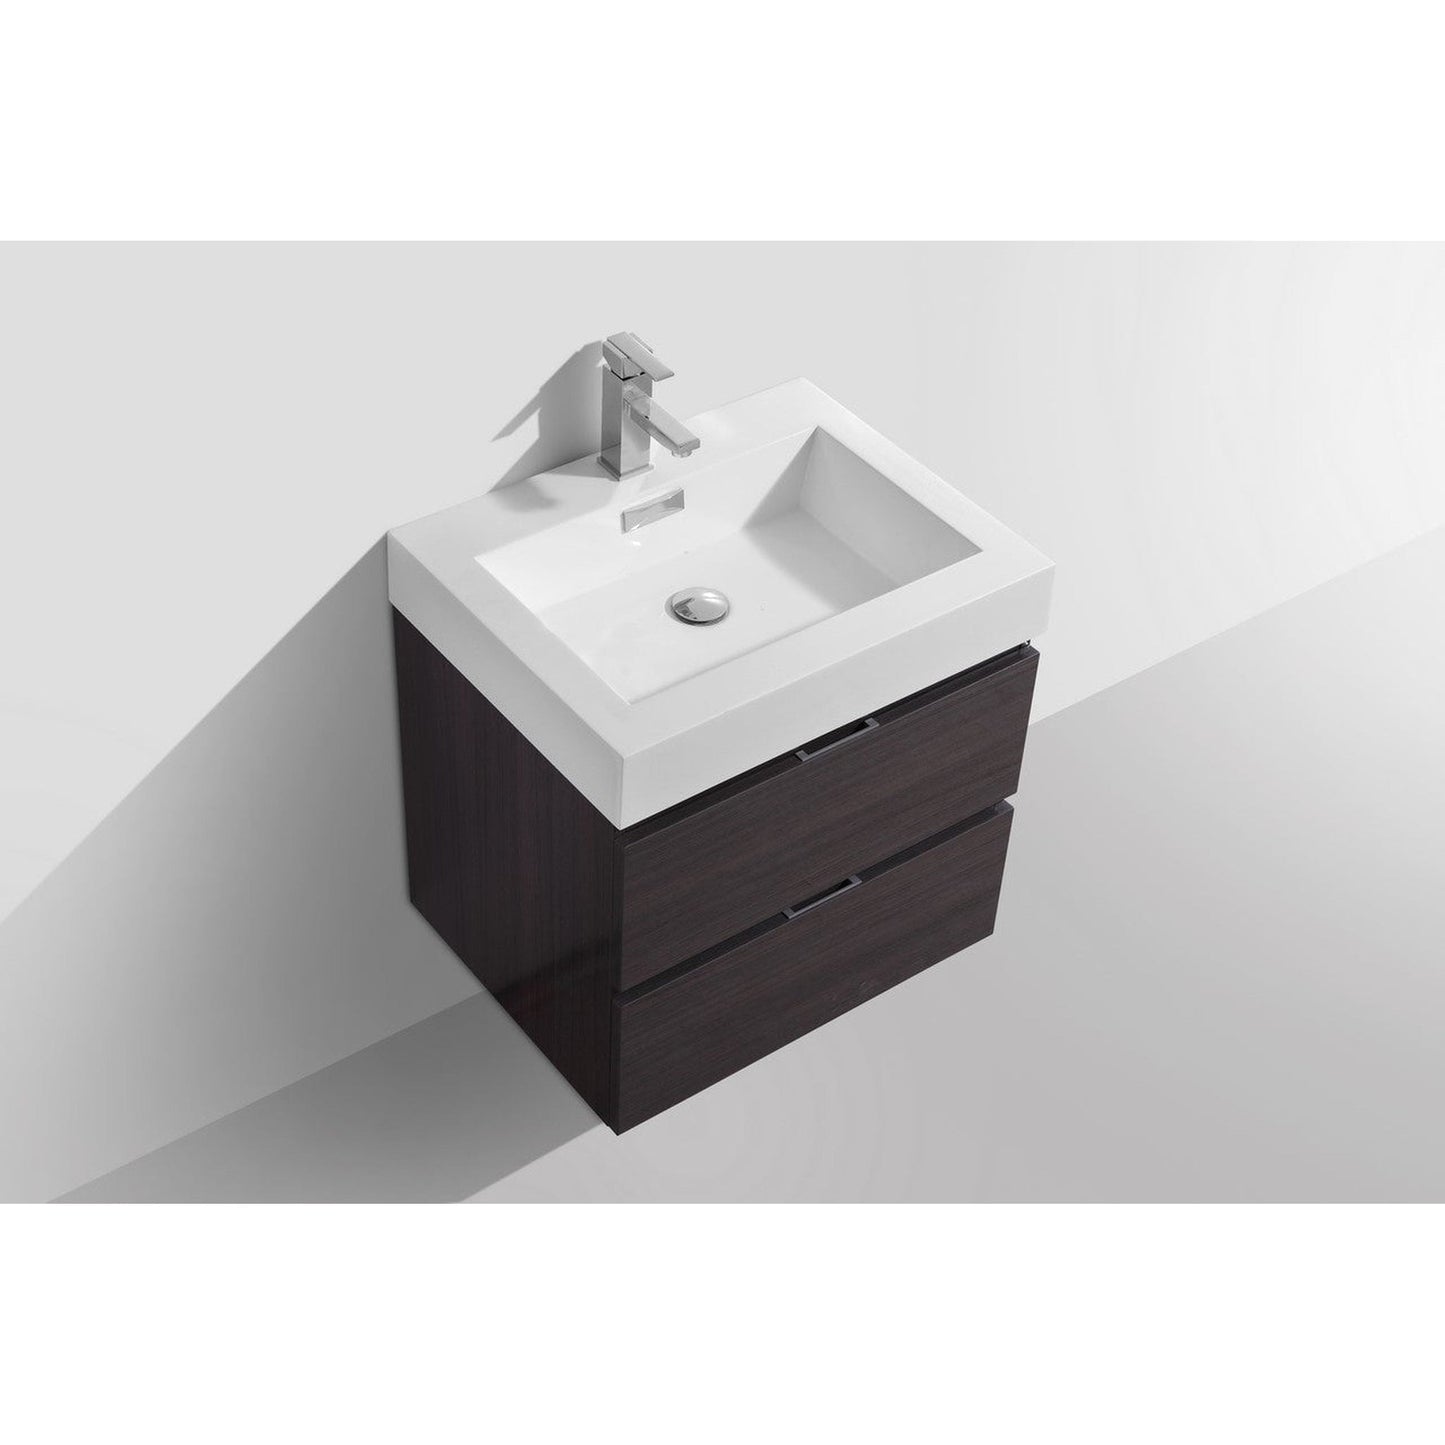 KubeBath Bliss 24" High Gloss Gray Oak Wall-Mounted Modern Bathroom Vanity With Single Integrated Acrylic Sink With Overflow and 22" Wood Framed Mirror With Shelf